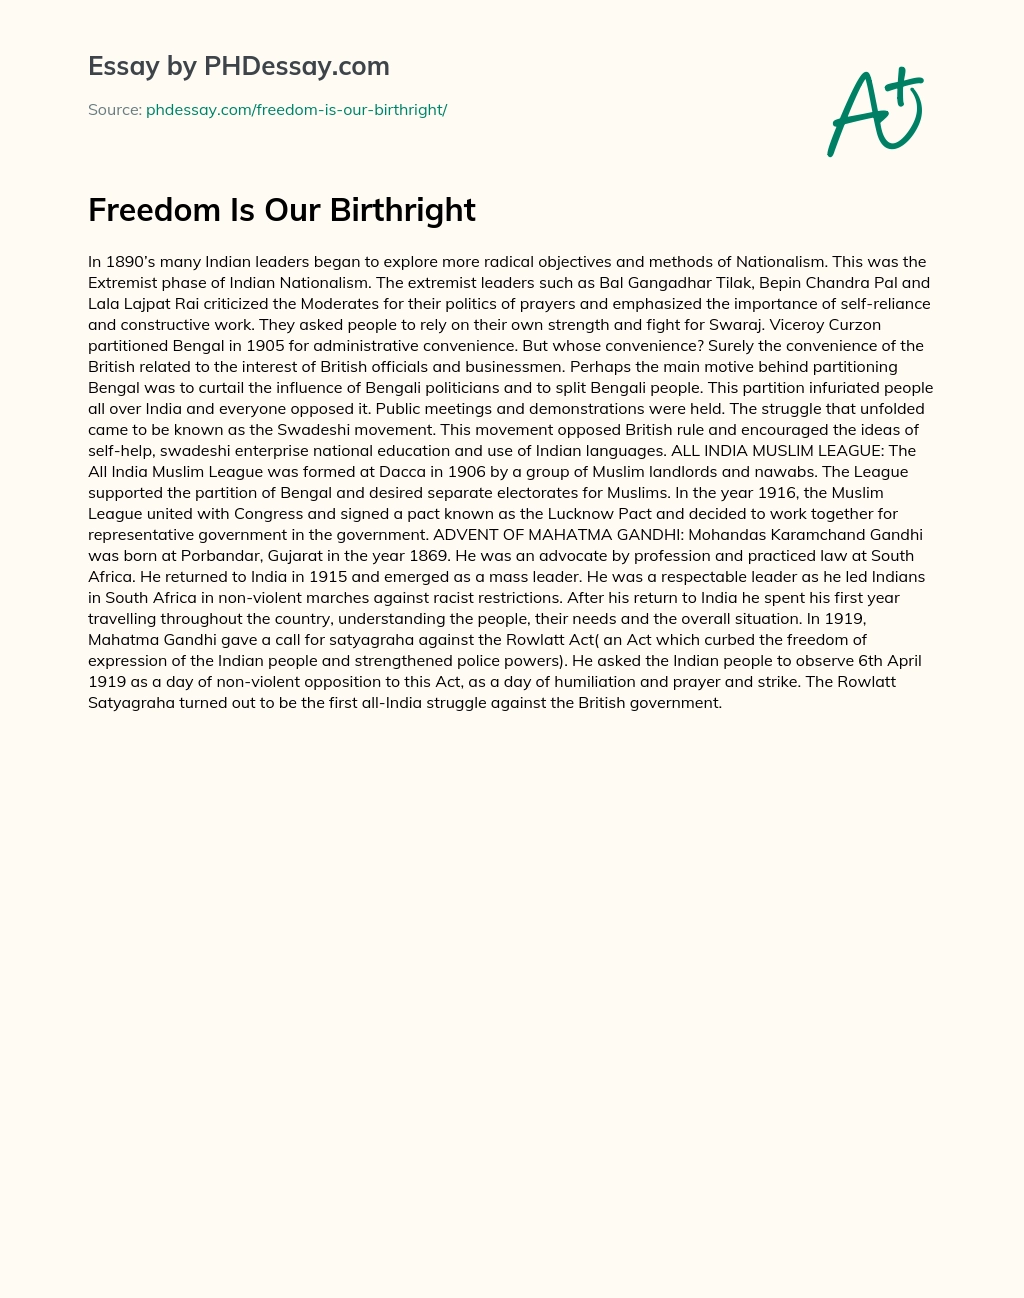 Freedom Is Our Birthright essay